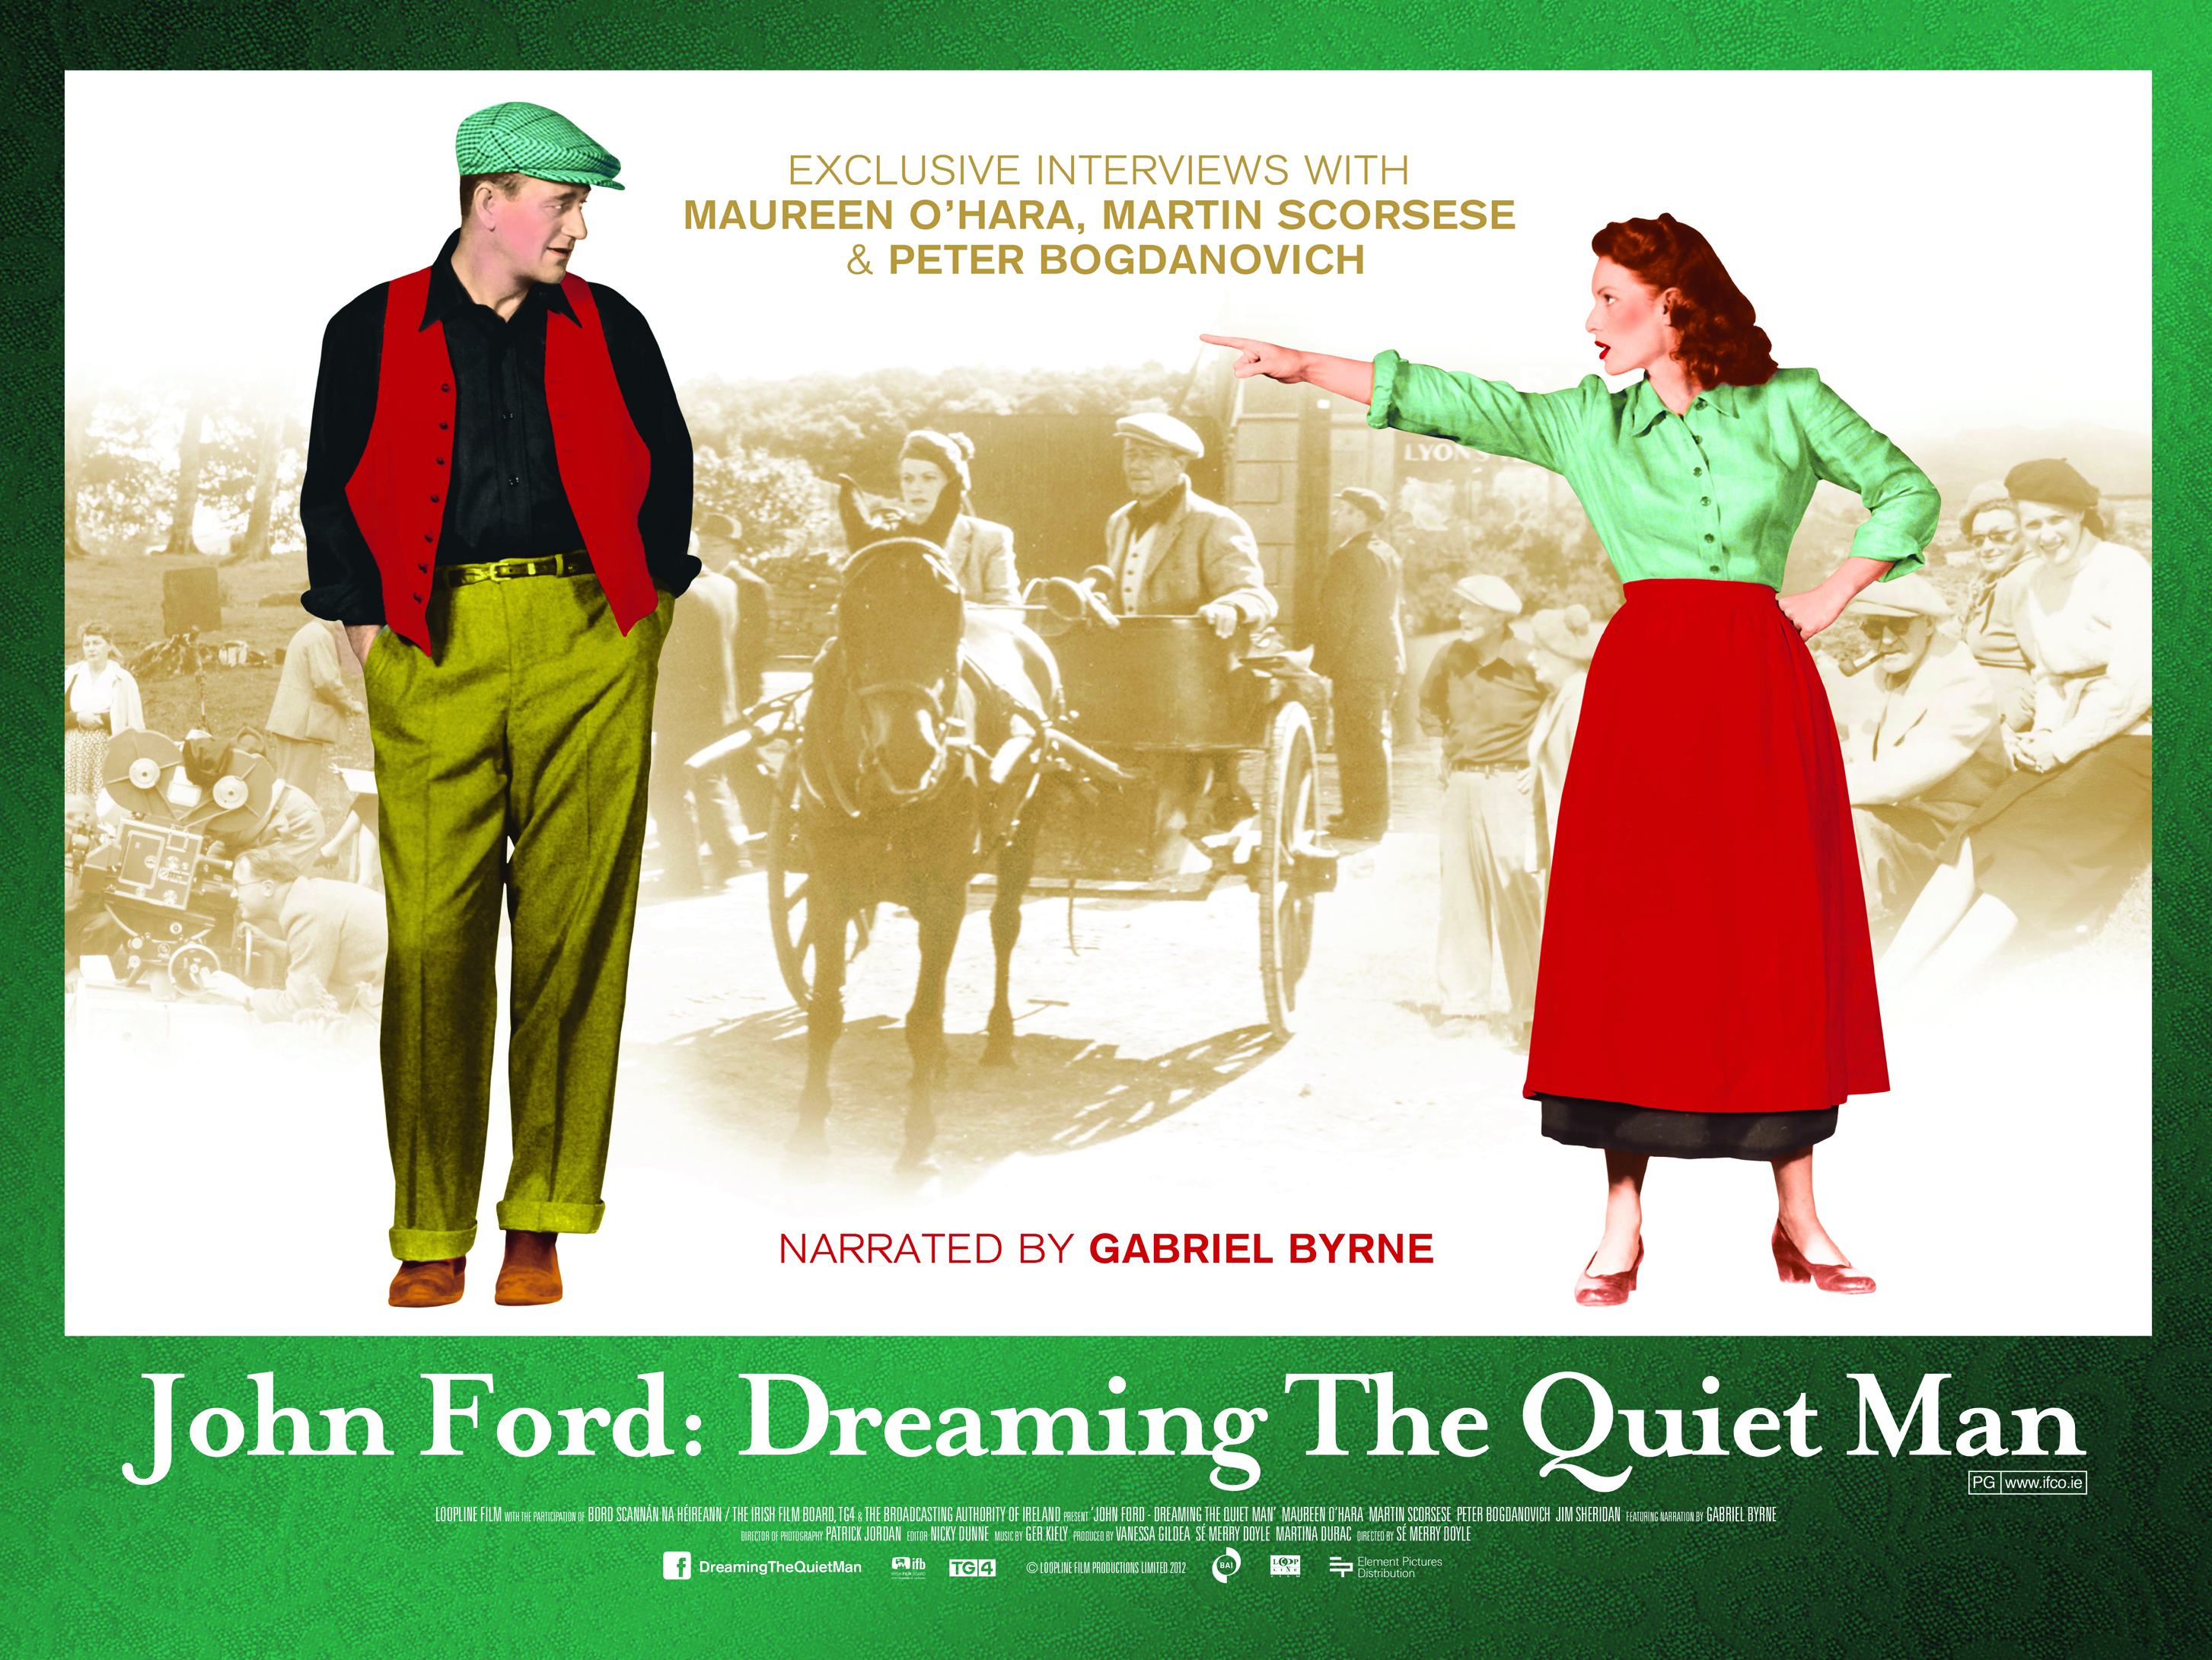 John Ford: Dreaming The Quiet Man